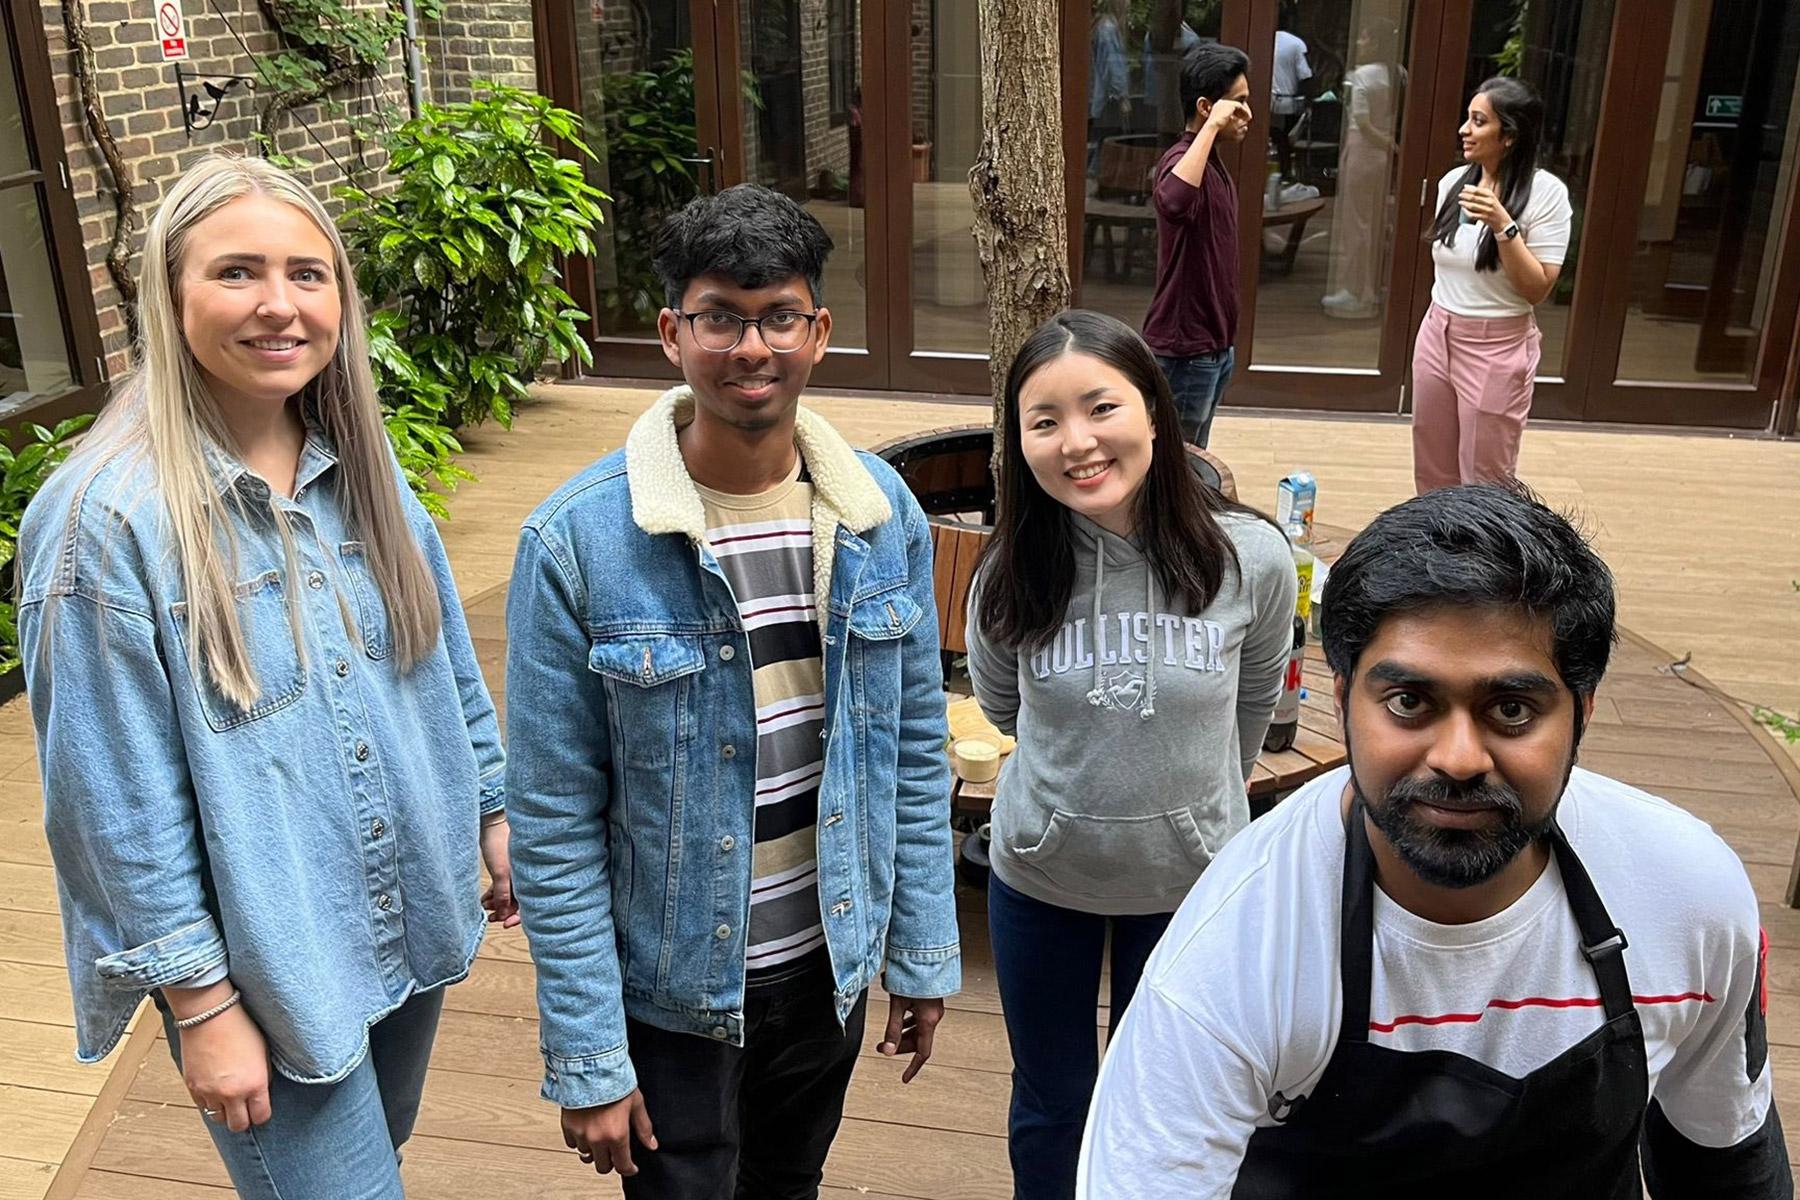 Some members of the International Lutheran Student Community in London. Coordinated through the Council of Lutheran Churches in Great Britain, the group fosters a sense of belonging among international students attending various universities and colleges in the city.  Photo:  Ashwin Joy 